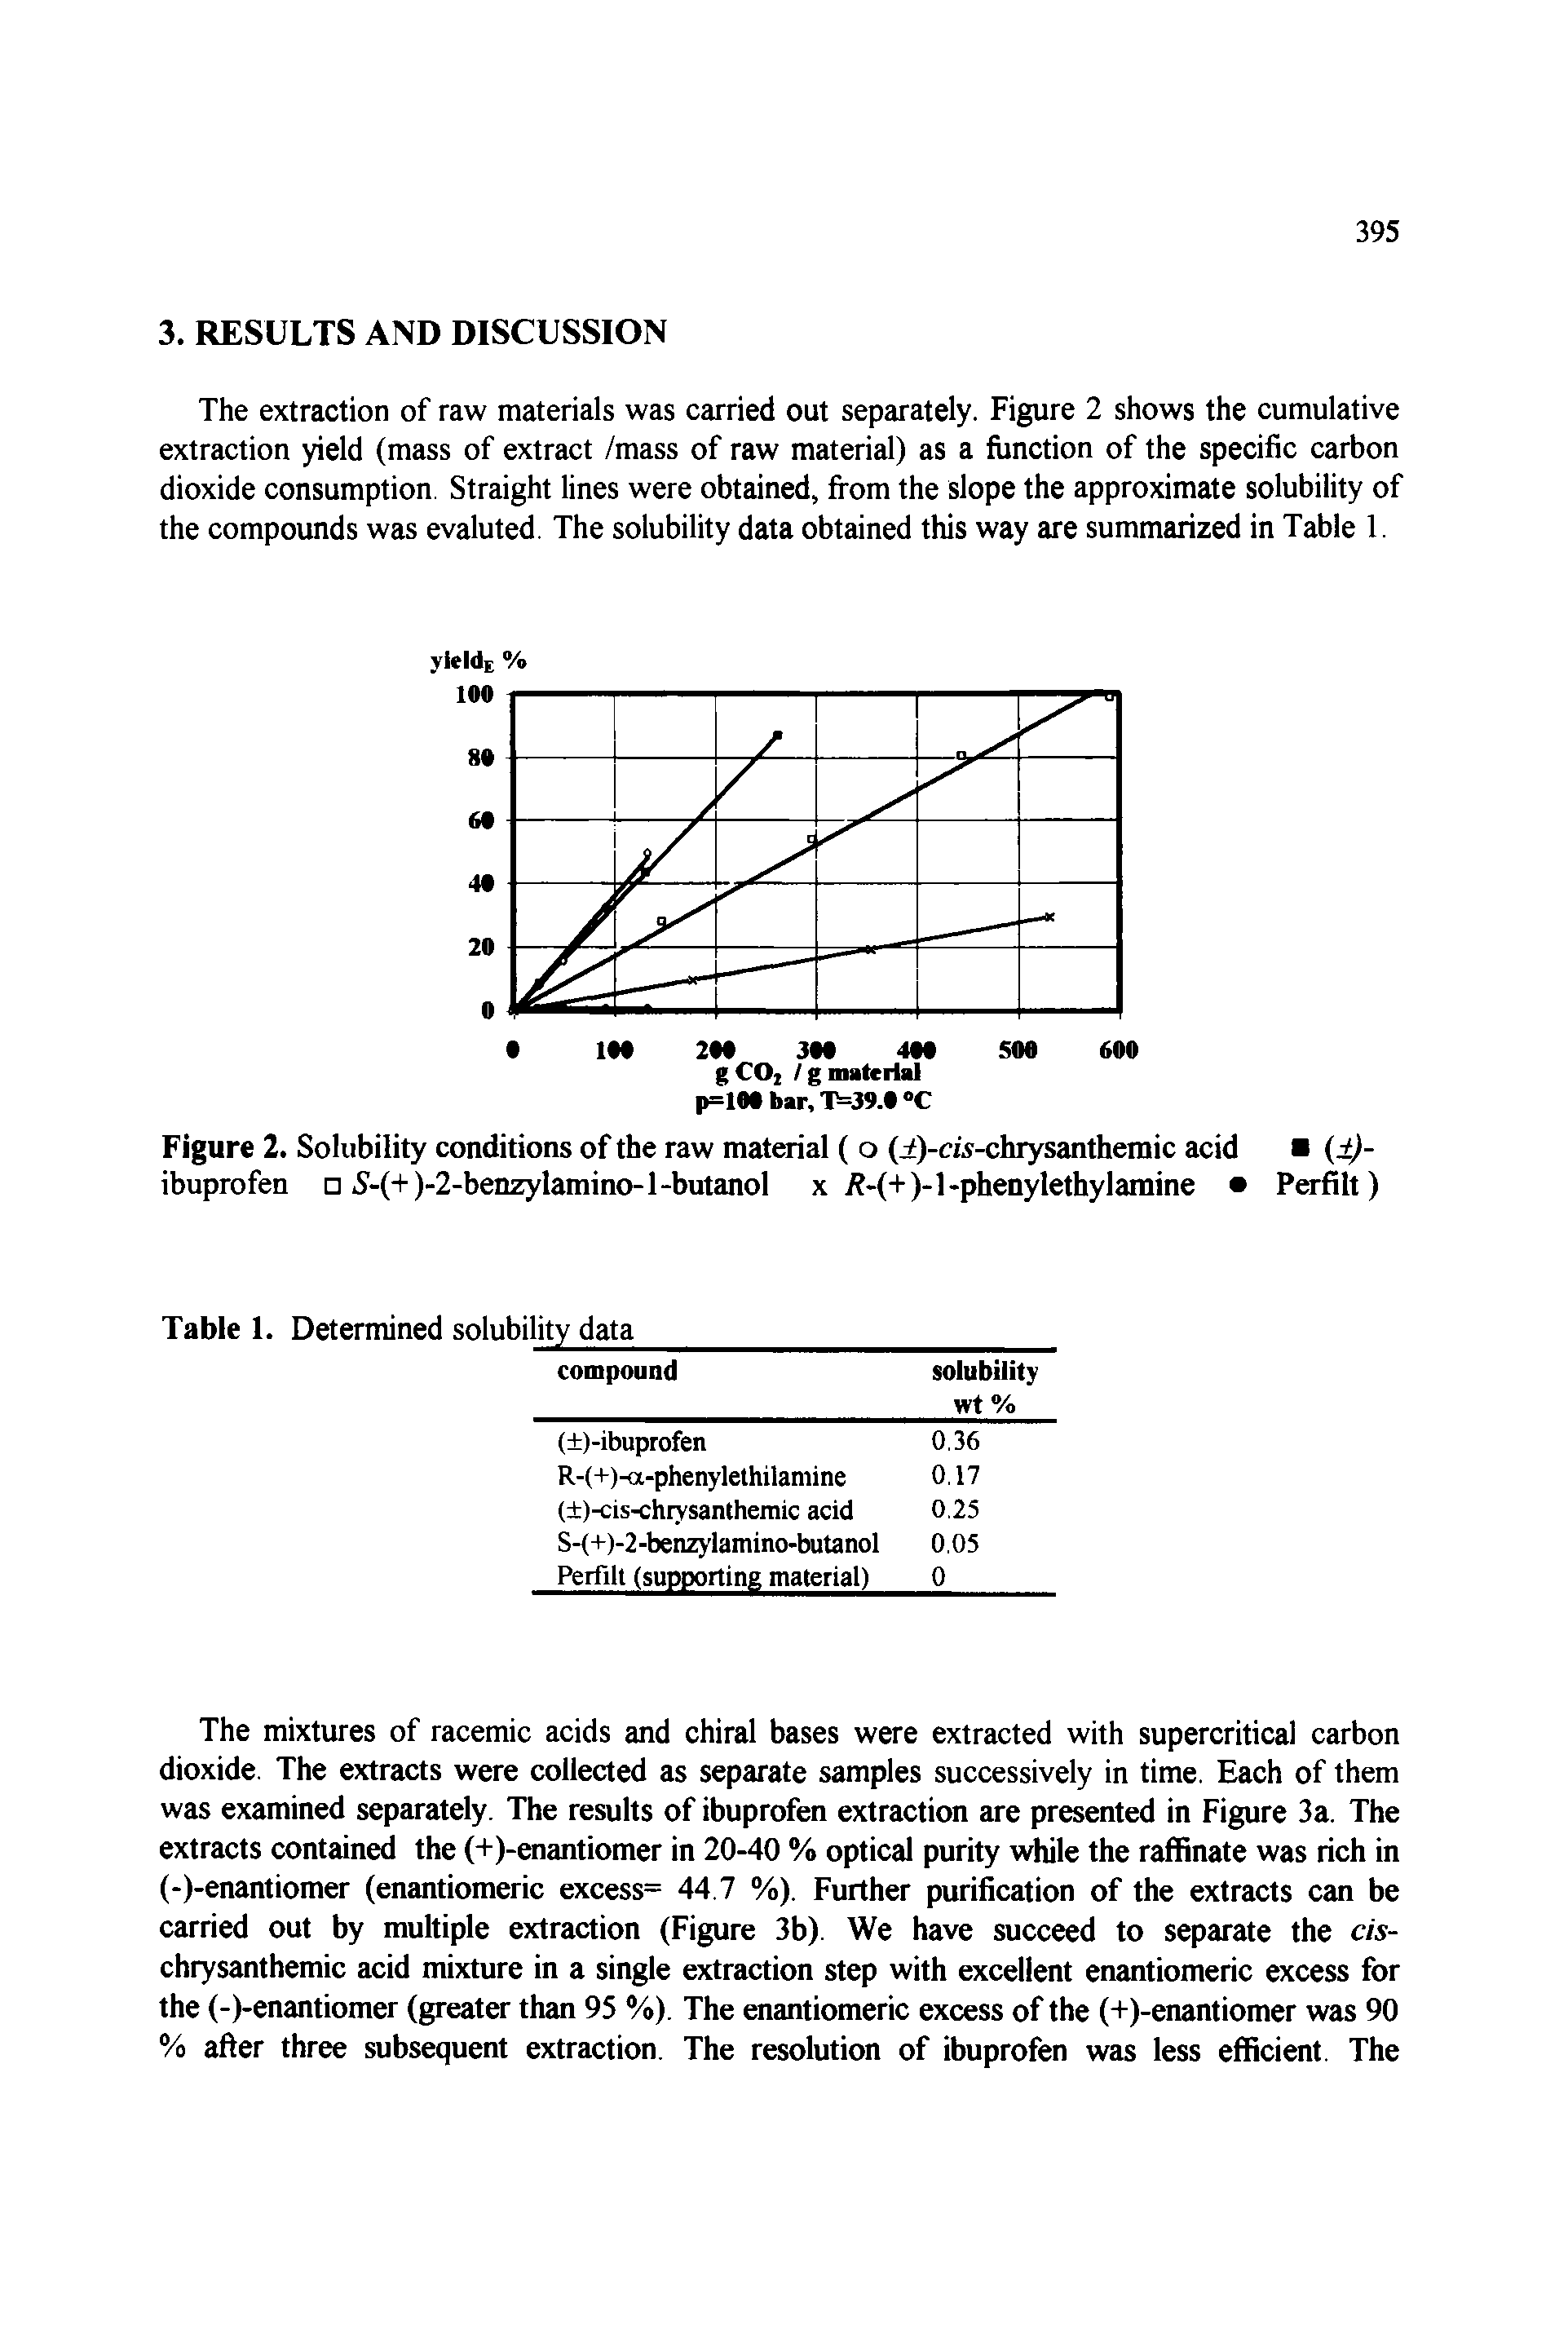 Figure 2. Solubility conditions of the raw material ( o (i)-cw-chrysanthemic acid ( )-ibuprofen S-(+)-2-benzylamino-l -butanol x / -(+)-1-phenylethylamine Perfilt)...